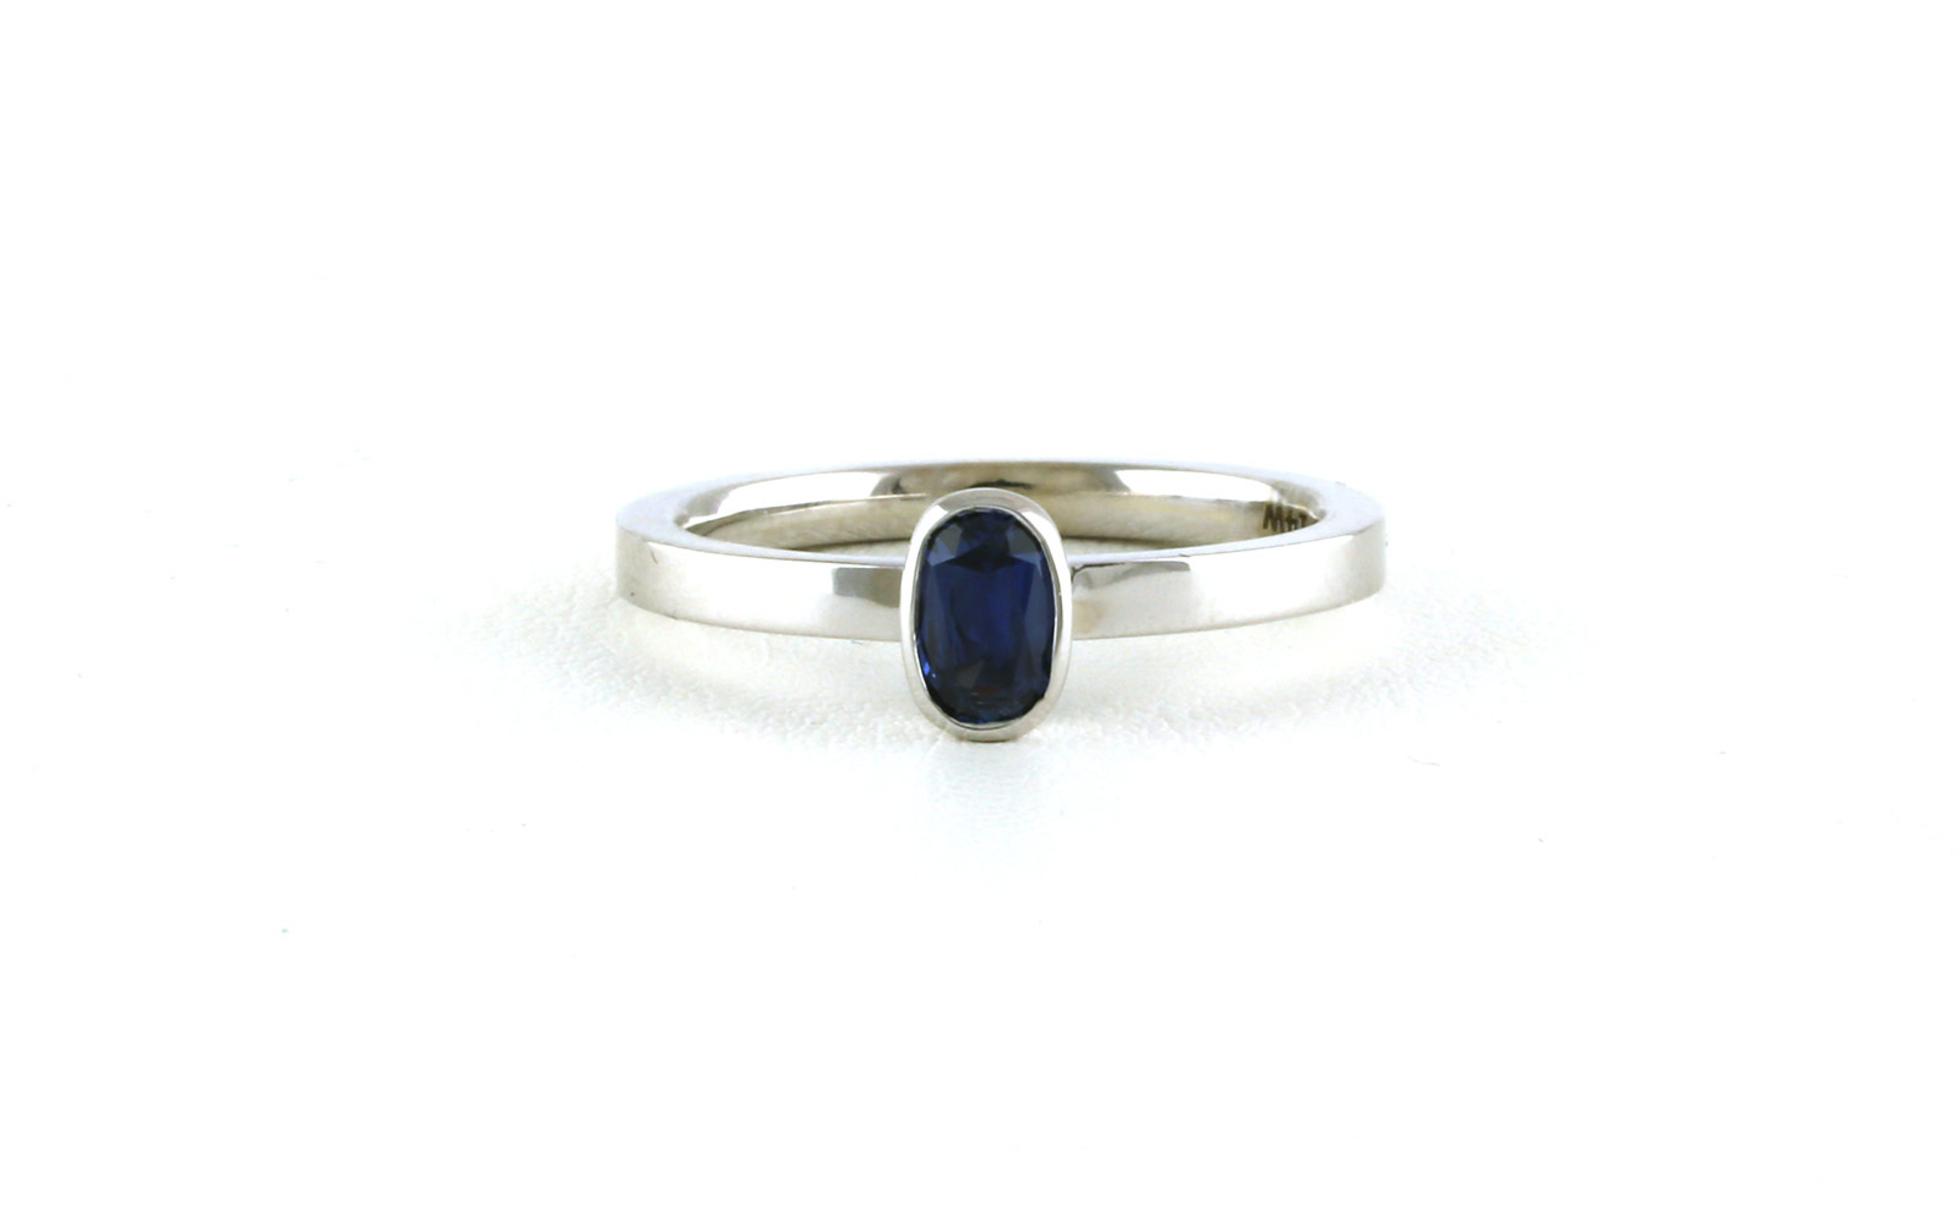 Solitaire-style Bezel-set Oval-cut Montana Yogo Sapphire Ring in White Gold (0.50cts)